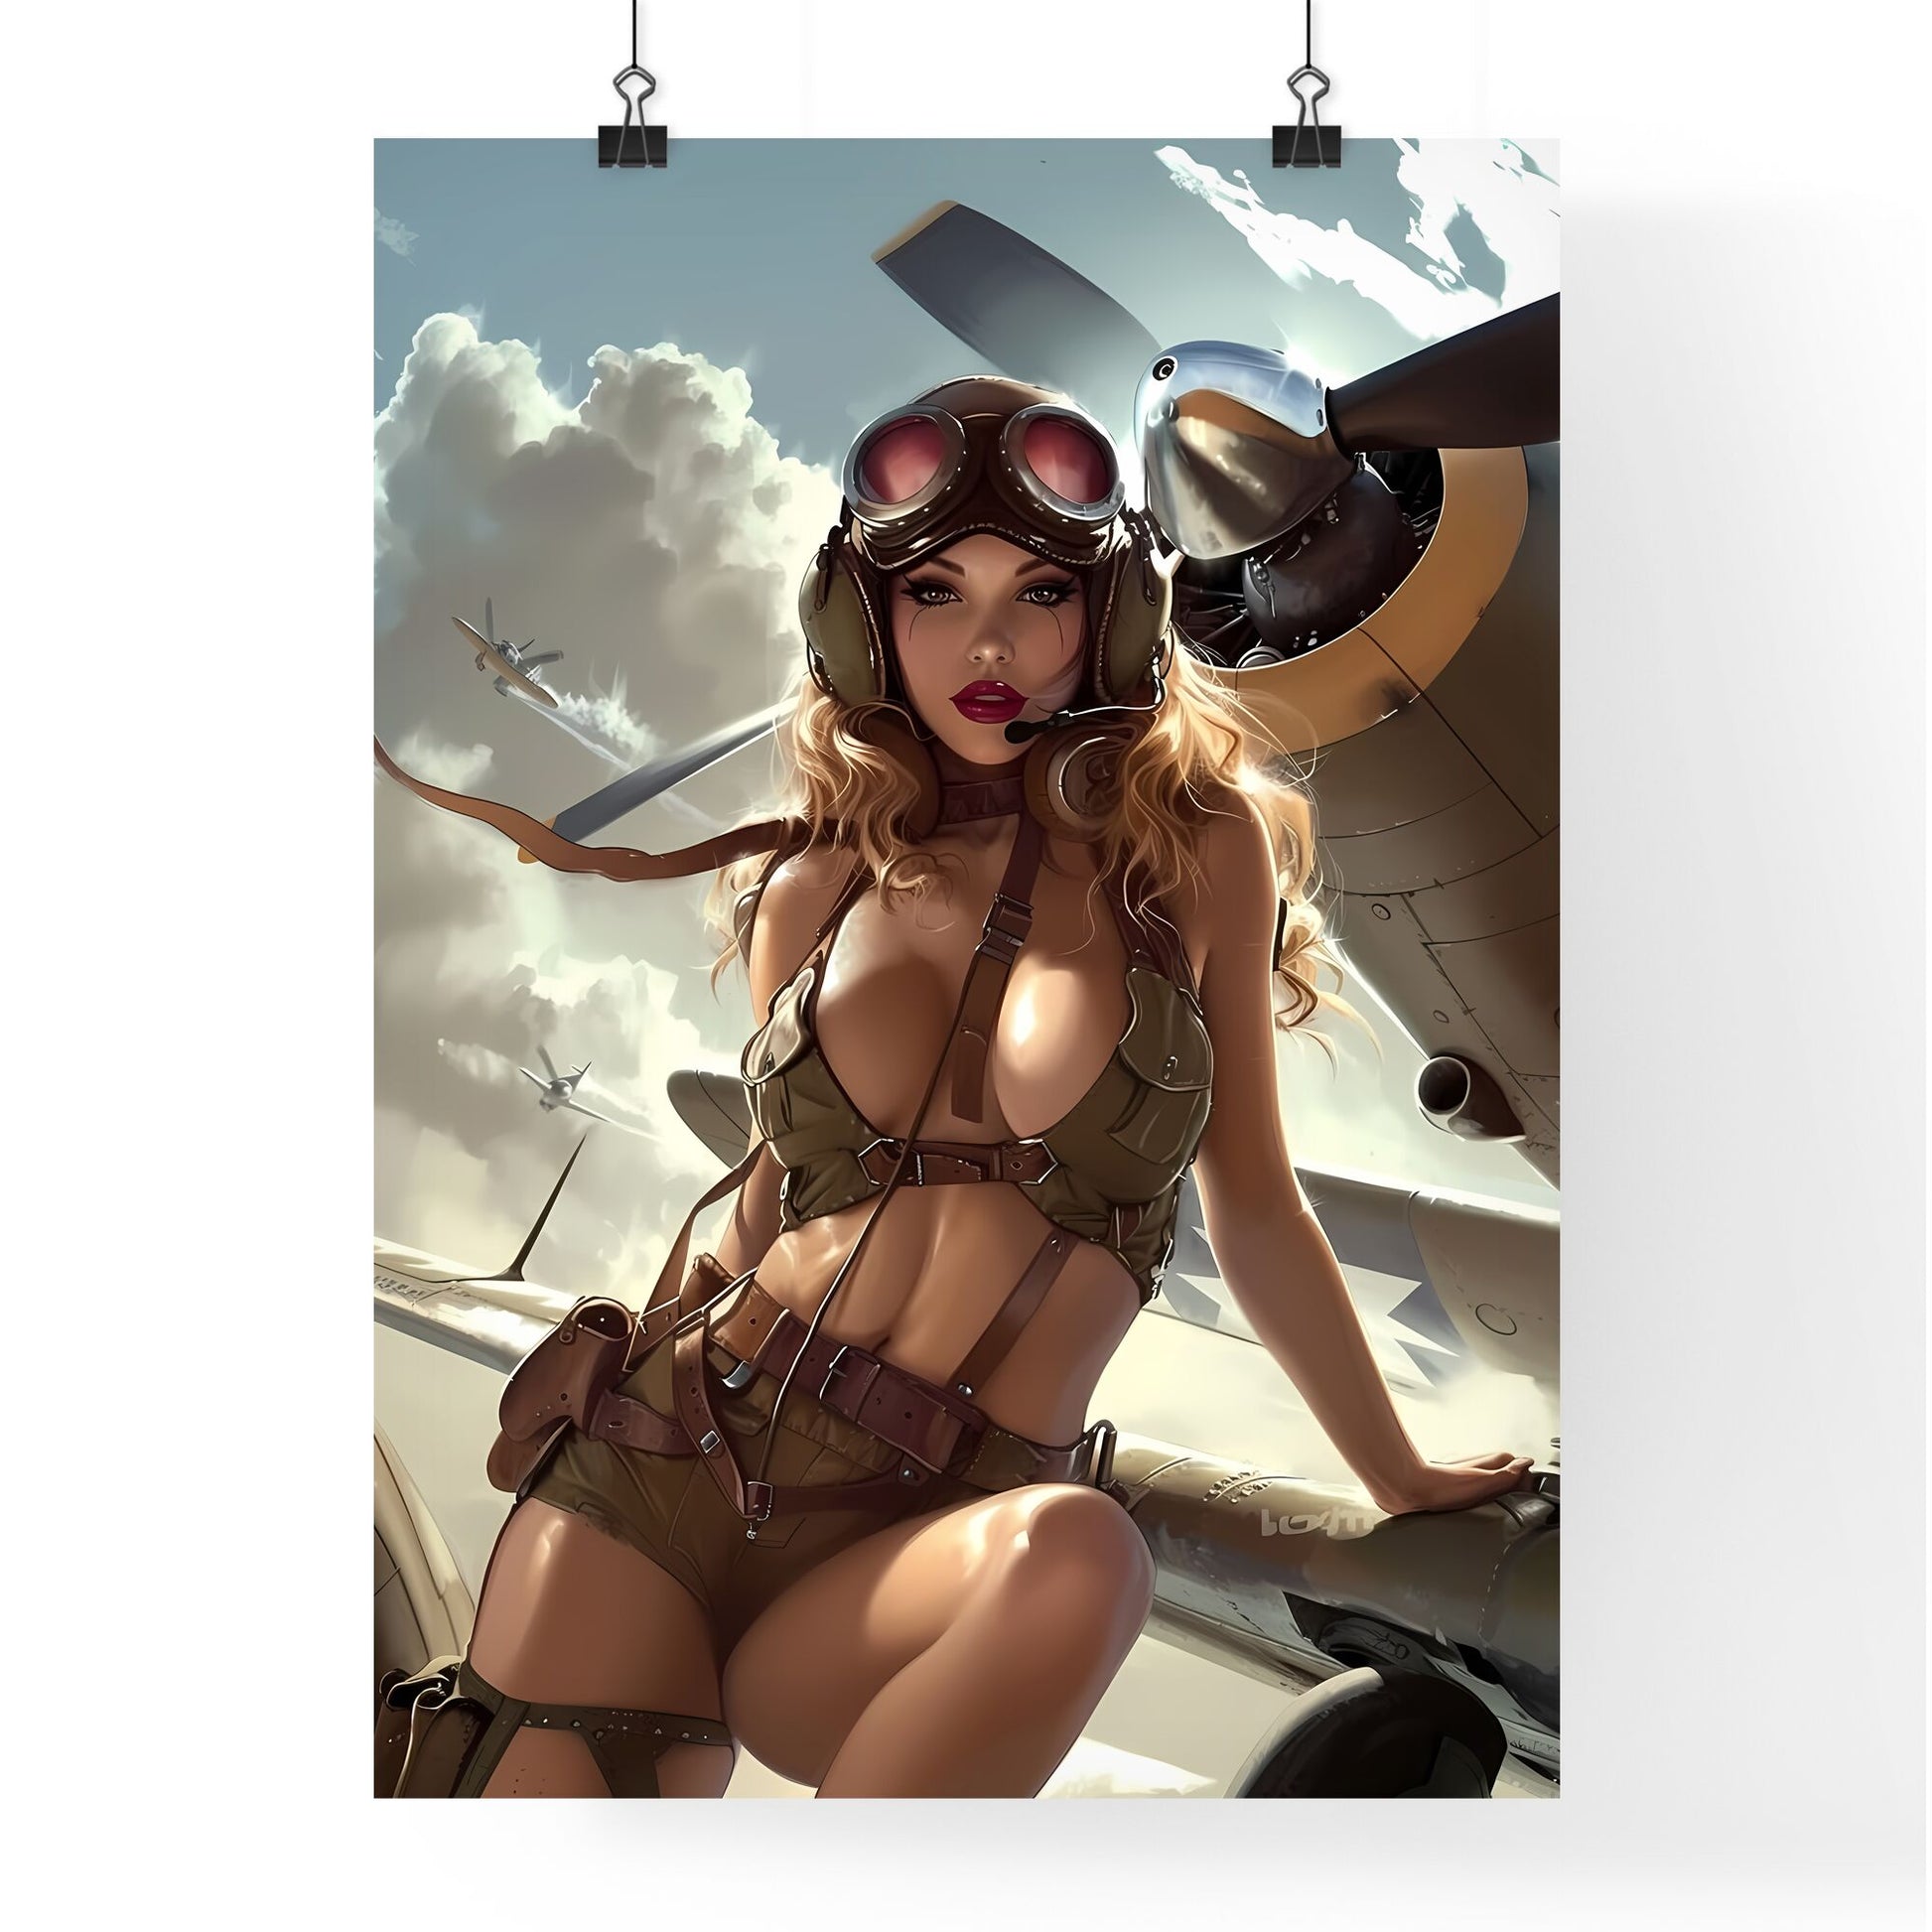 Gogo girl hyper realism style - Art print of a woman in a military uniform Default Title